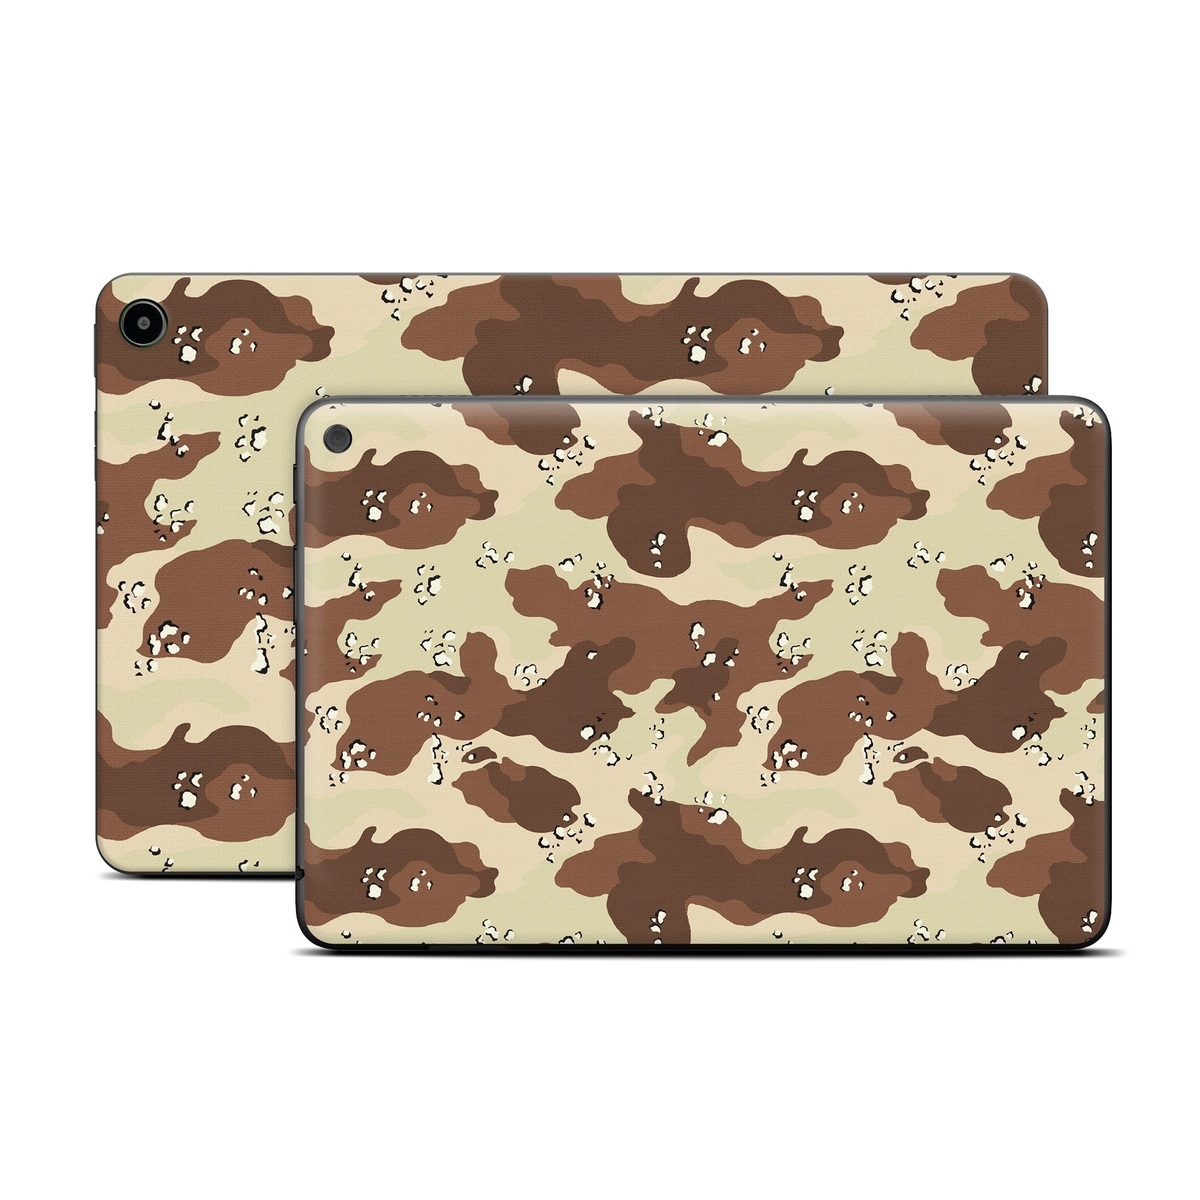 Amazon Fire Tablet Series Skin Skin design of Military camouflage, Brown, Pattern, Design, Camouflage, Textile, Beige, Illustration, Uniform, Metal, with gray, red, black, green colors